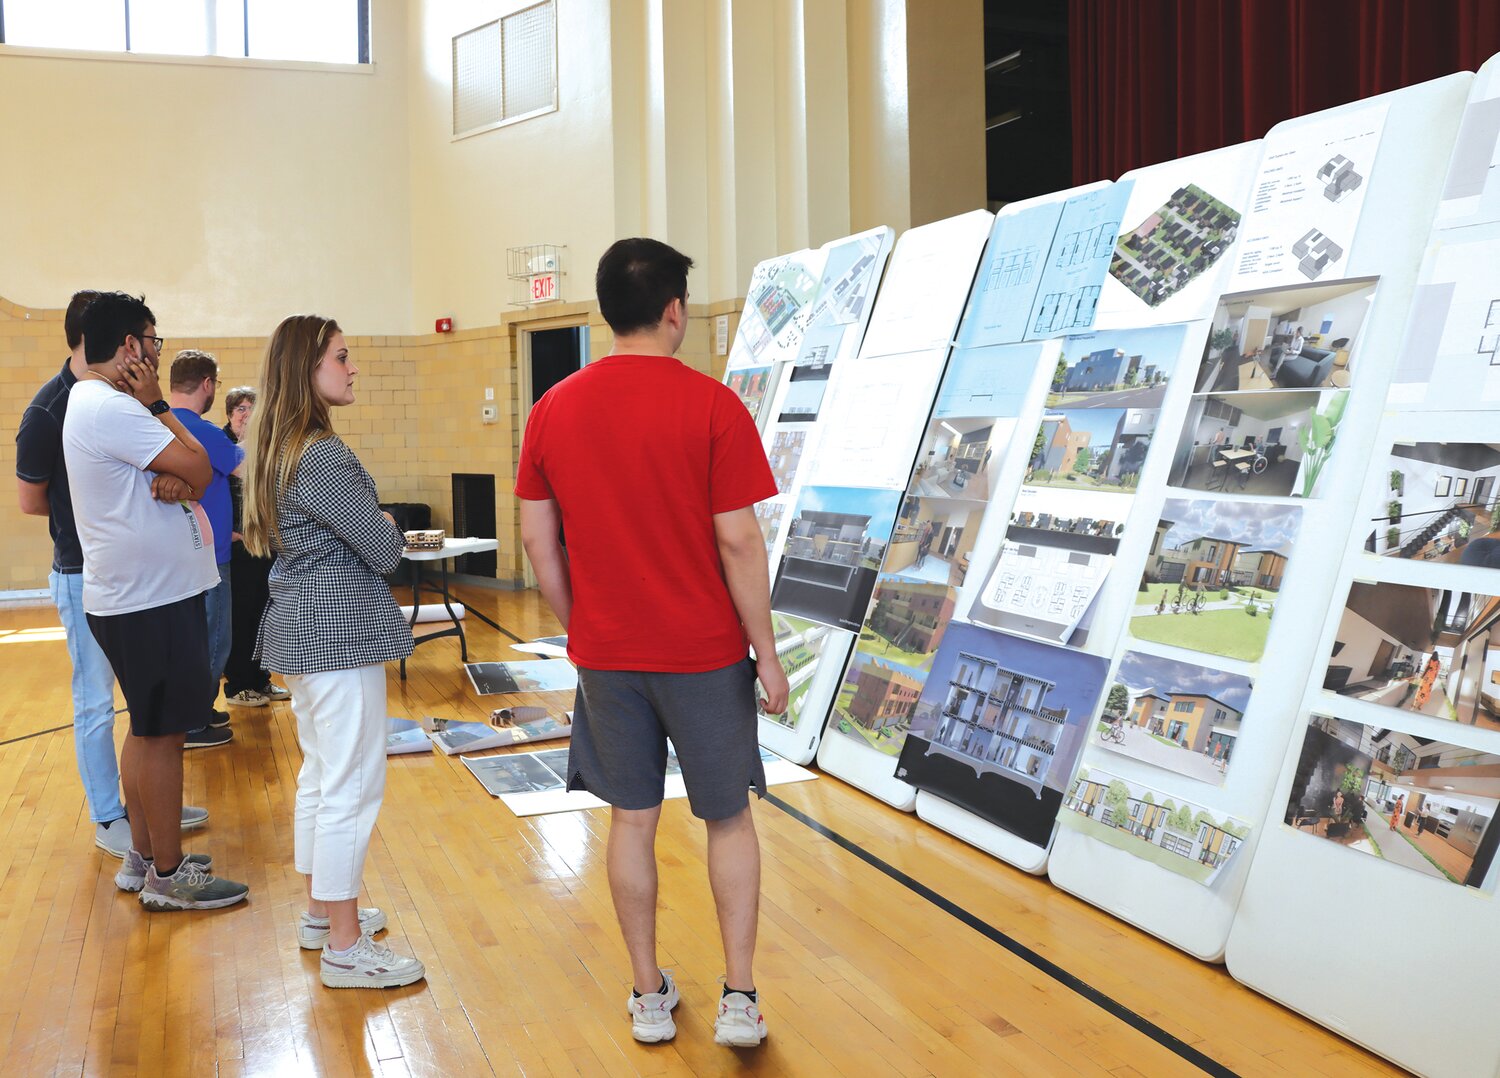 Attendees at a recent open house at the Wayne City Auditorium were able to see the results of a collaborative effort between Wayne Community Housing Development, Woehler & Sons and students from the University of Nebraska-Lincoln. The students worked to create a housing development plan for the city of Wayne.